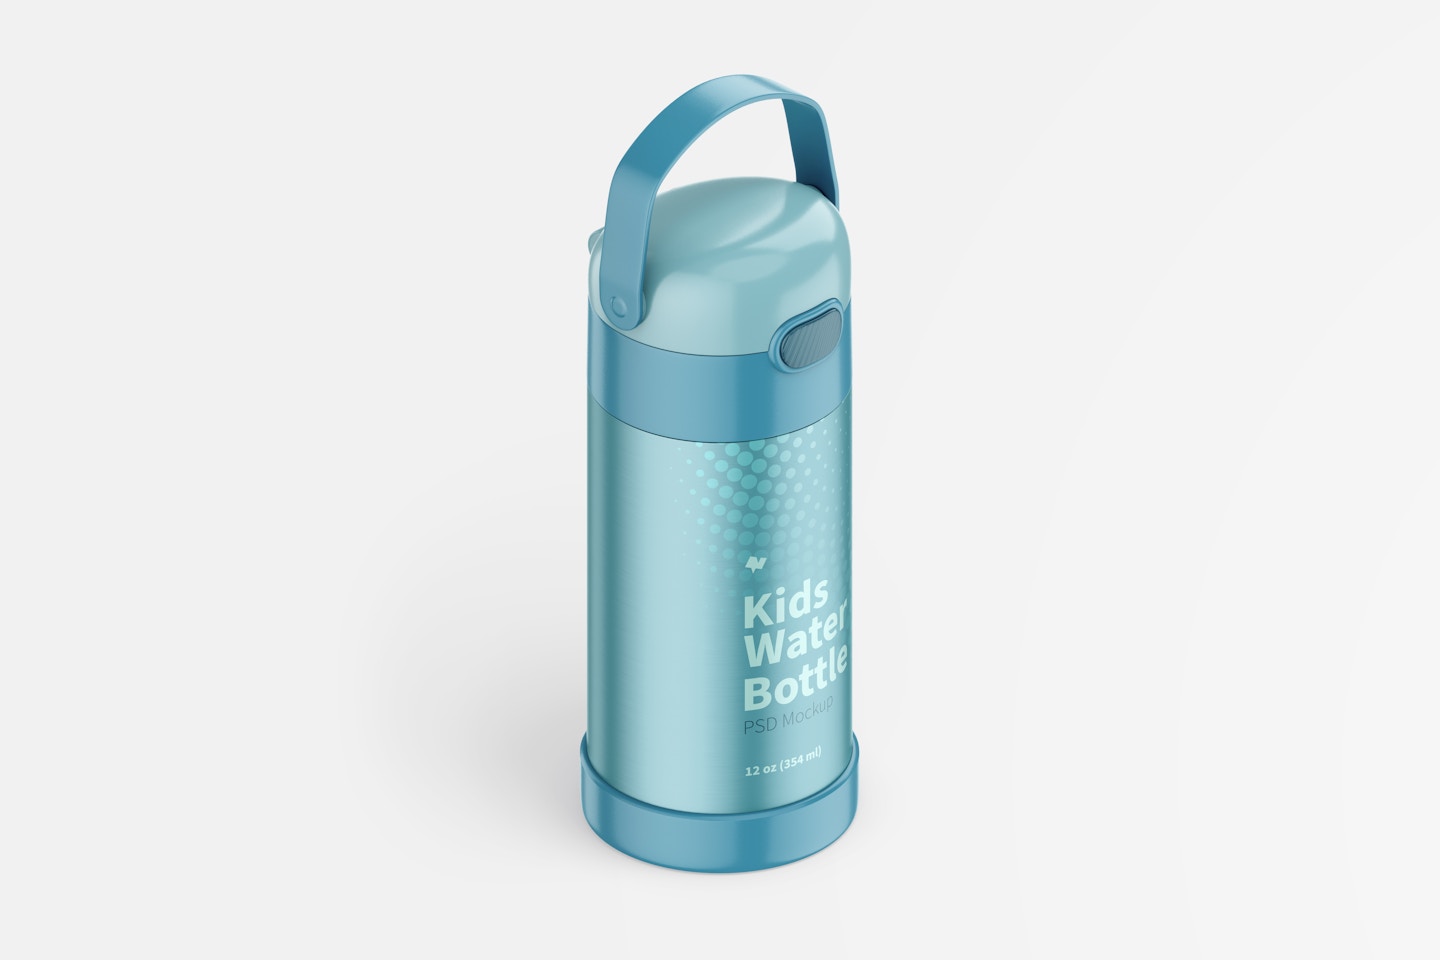 12 oz Kids Water Bottle Mockup, Isometric Right View